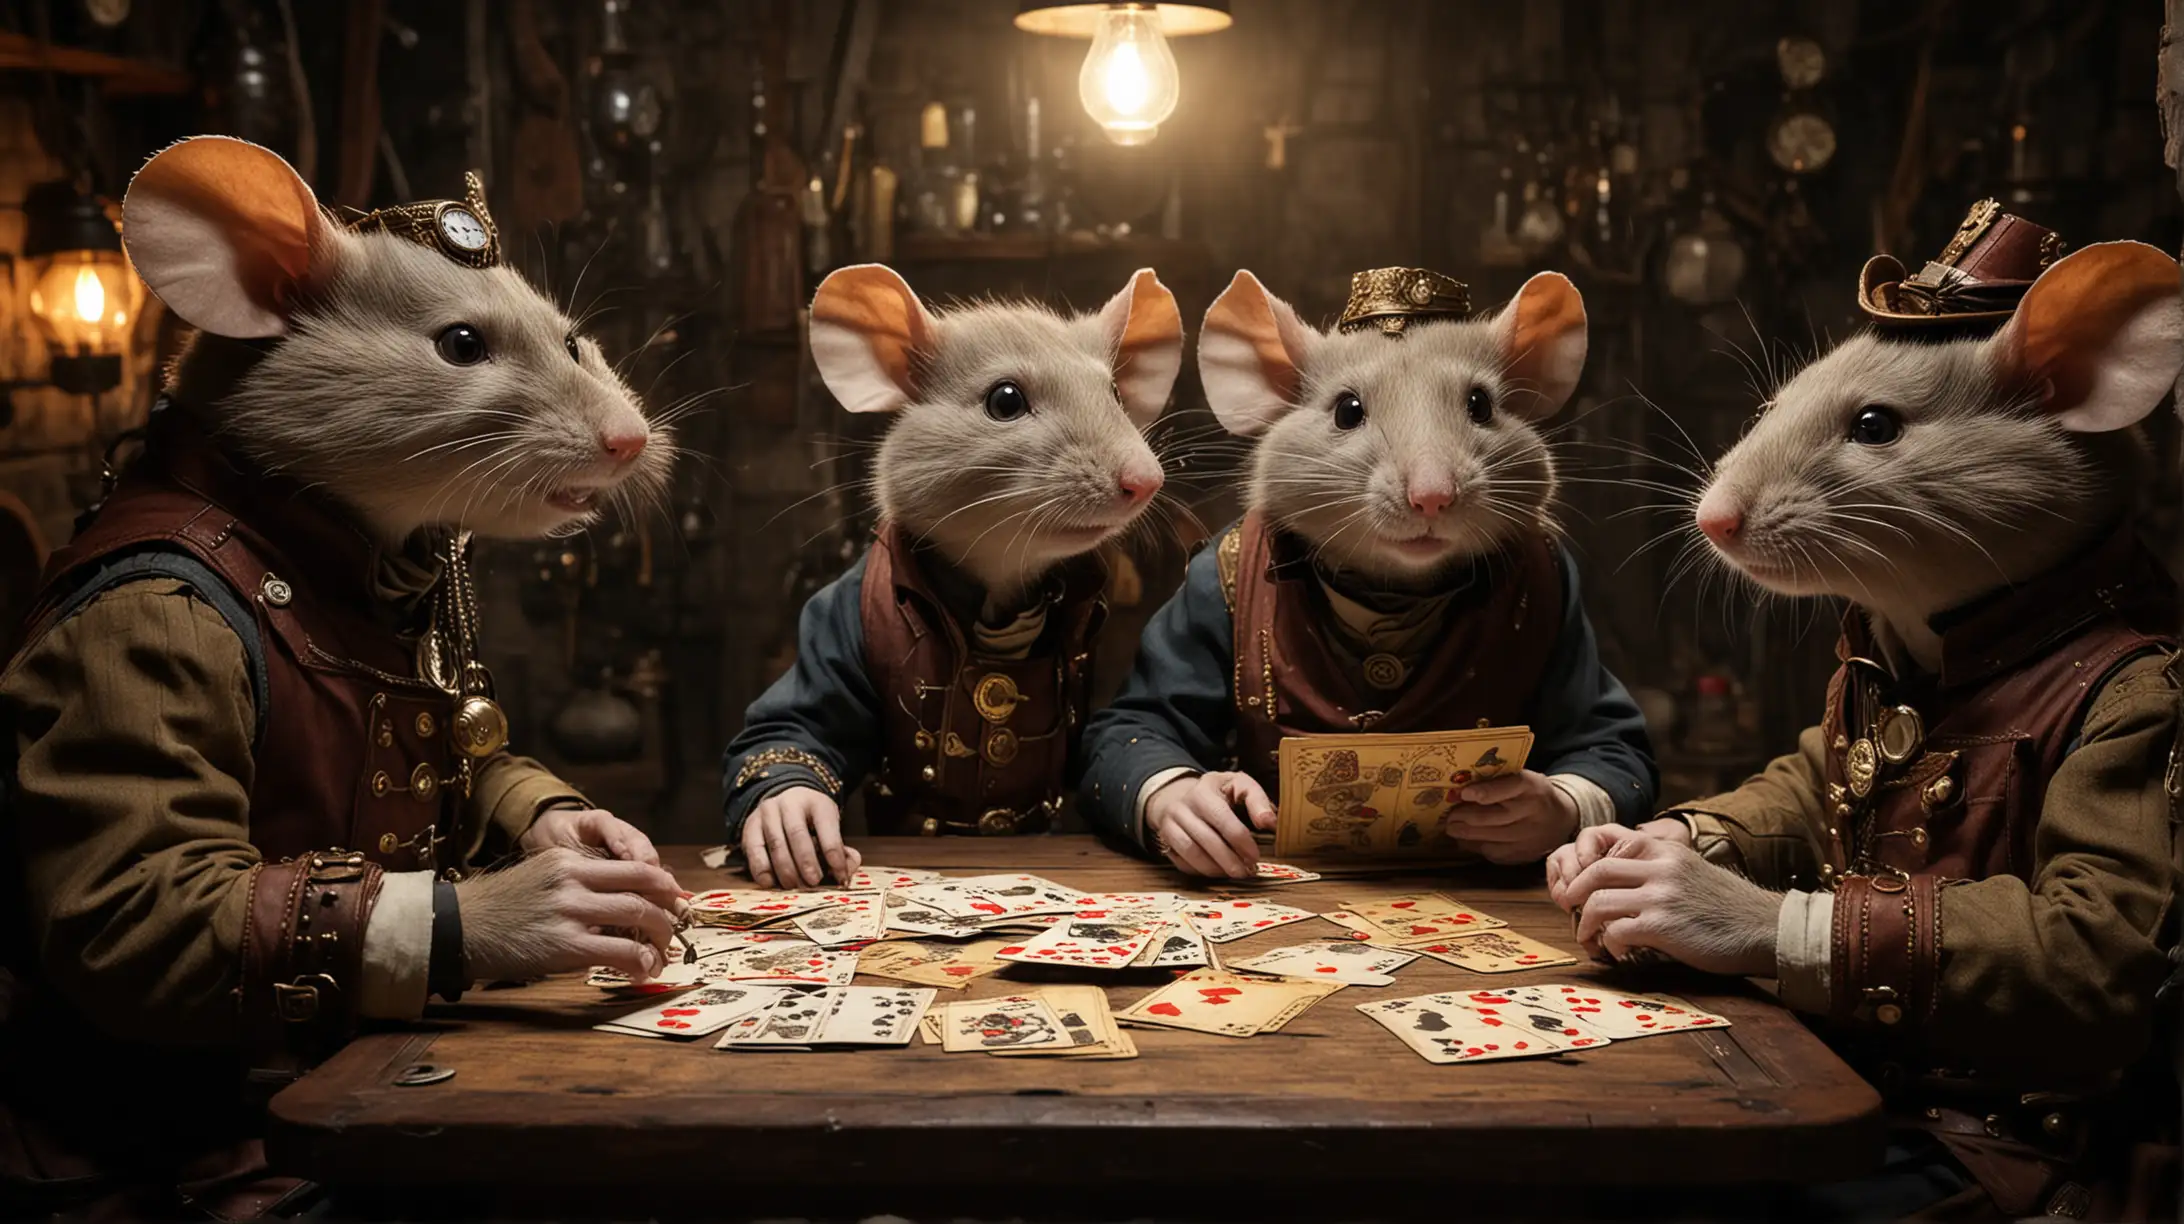 Four rats in steampunk uniforms play cards at the table in a cellar, it is almost dark, but the cellar is well illuminated